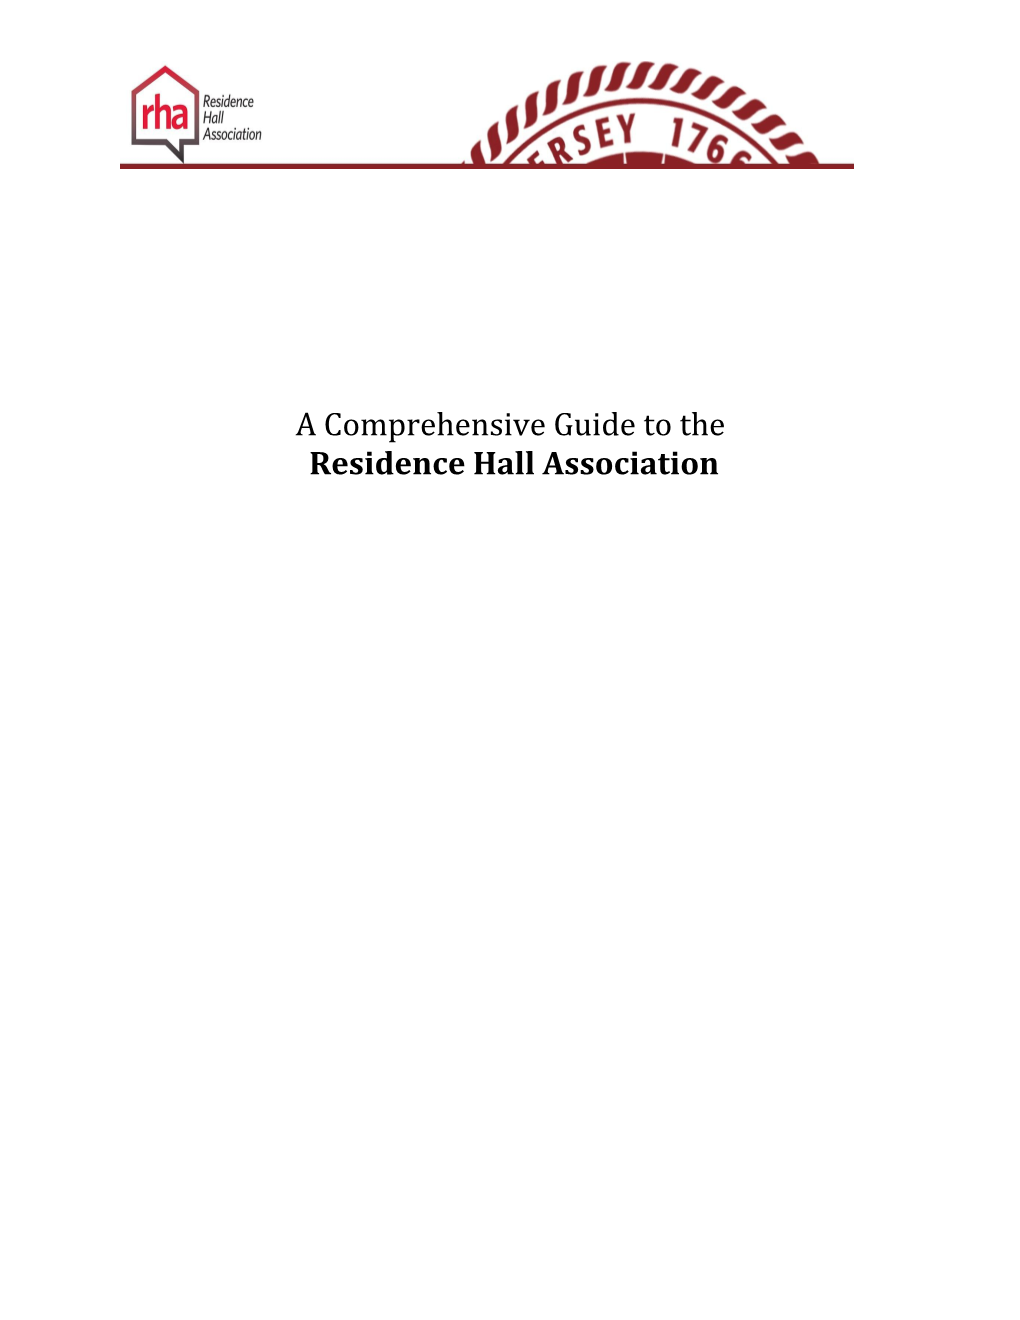 What Is Residence Hall Association?